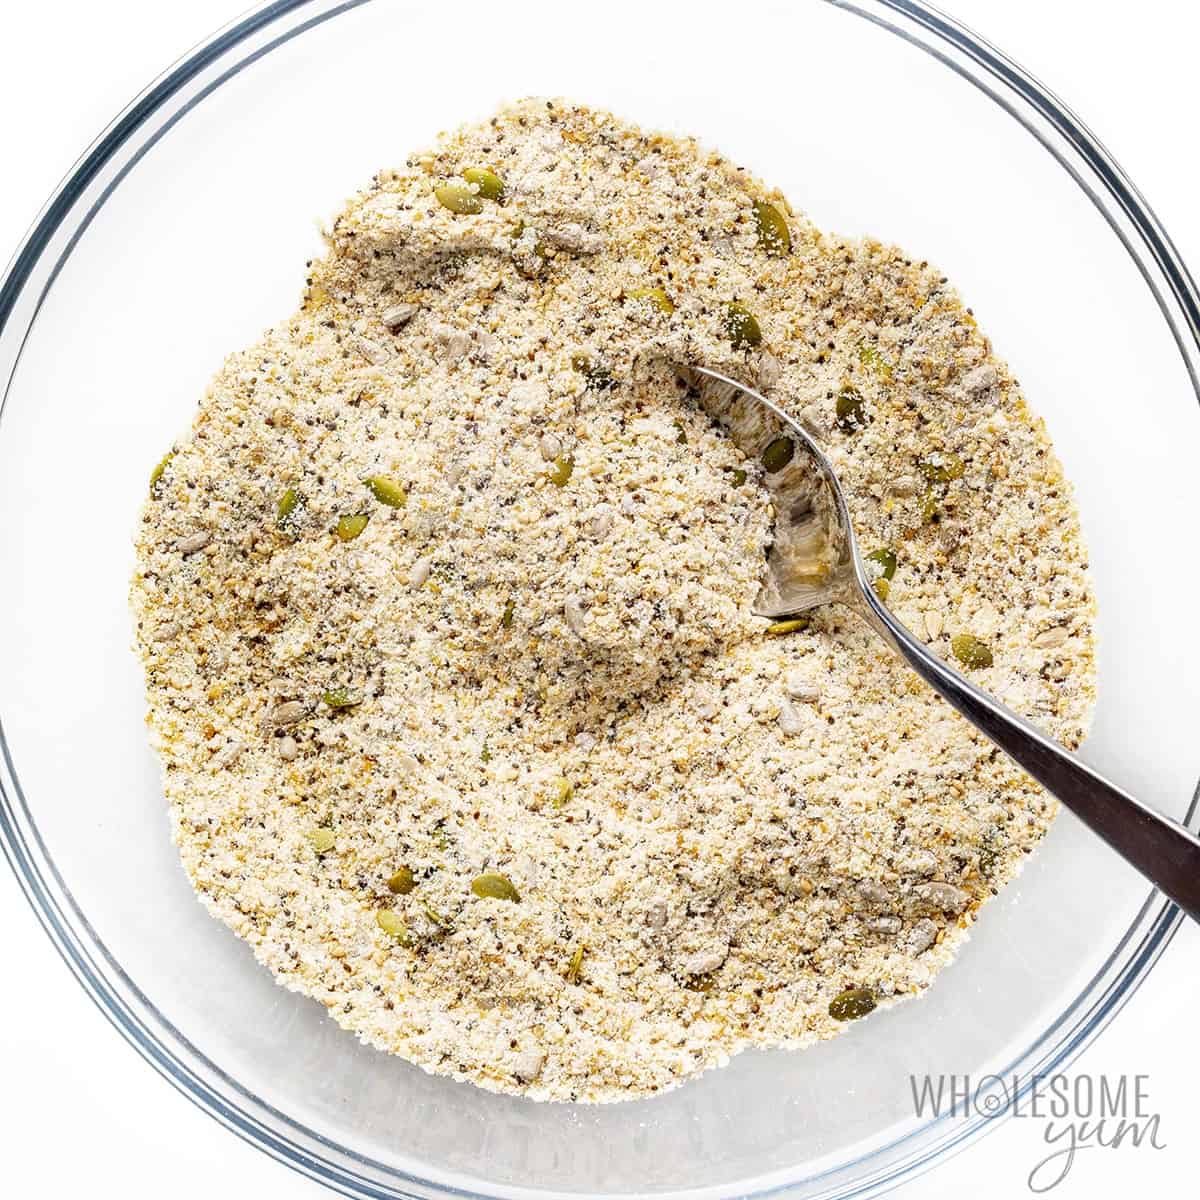 Dry bread ingredients mixed in a bowl.